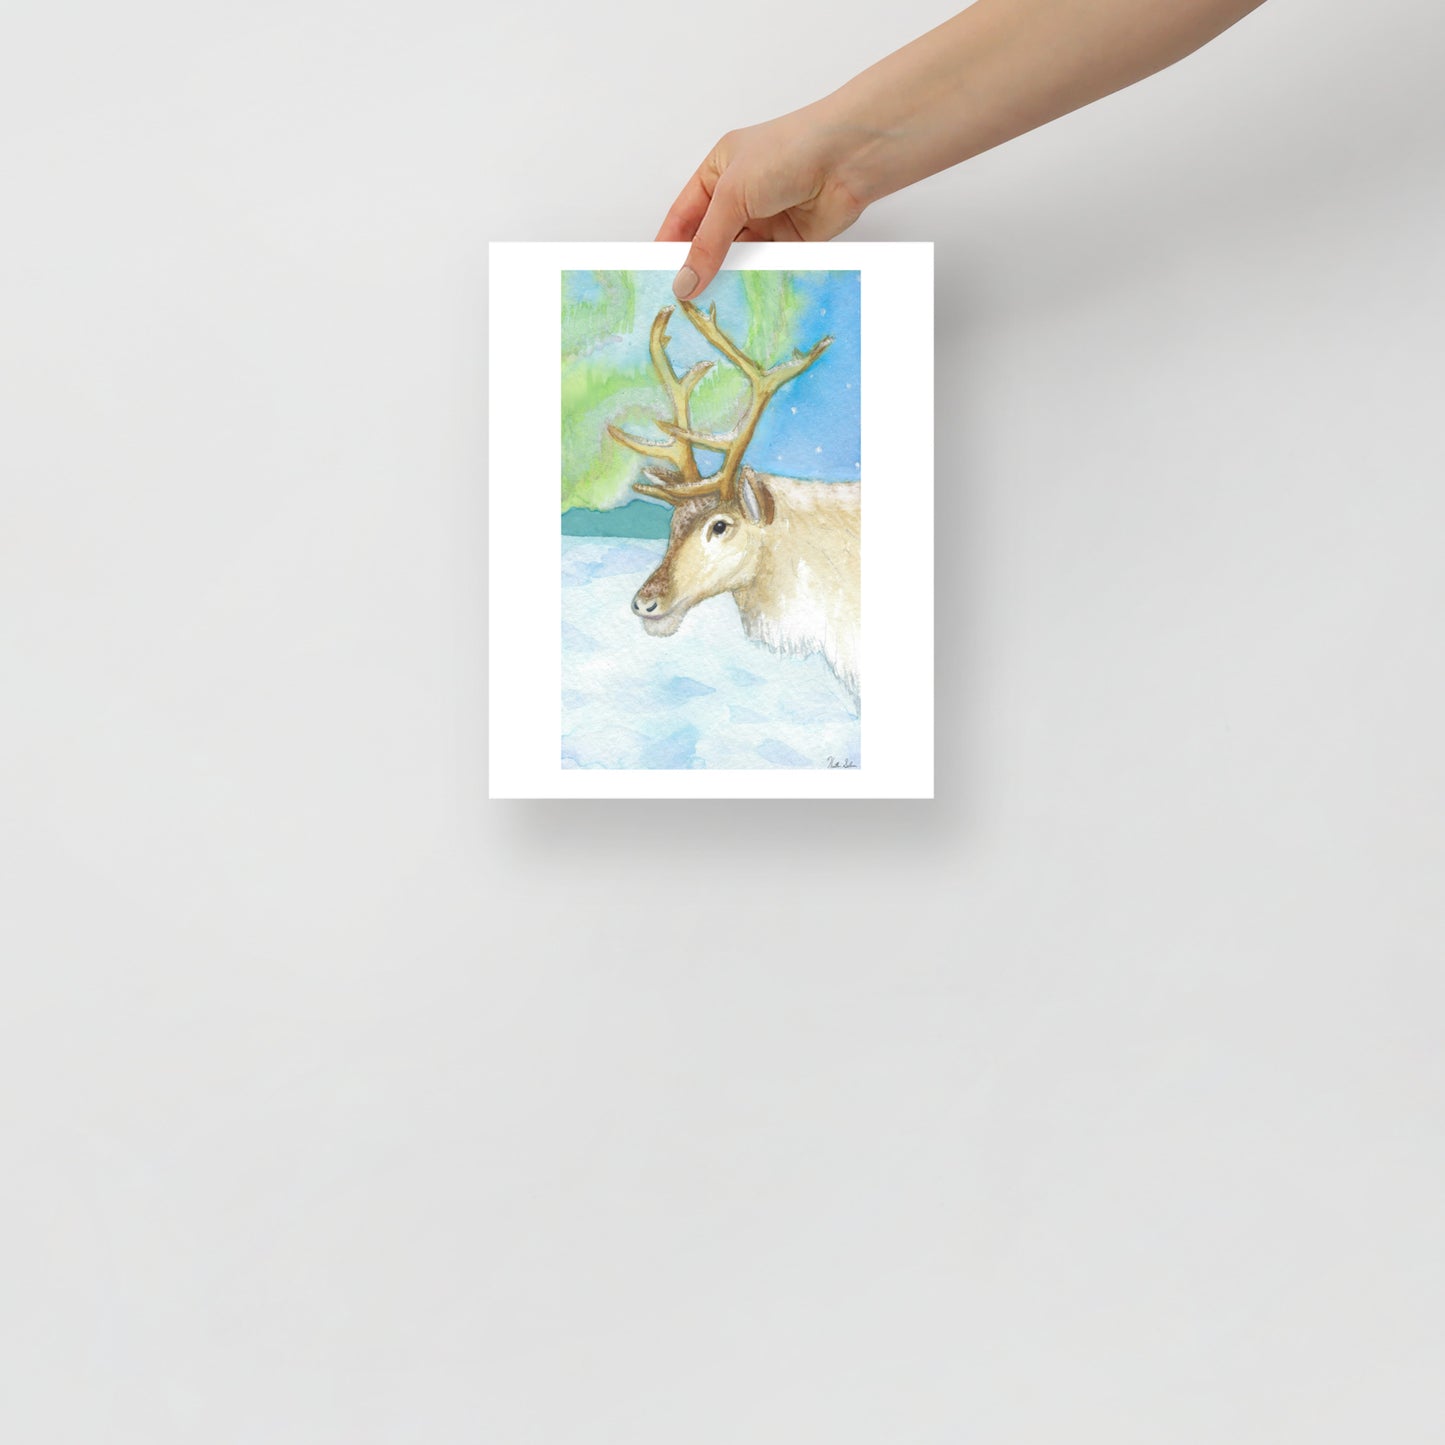 11 by 14 inch art poster print. Watercolor painting of a snowy reindeer with the northern lights in the background. Shown being held by a model's hand.